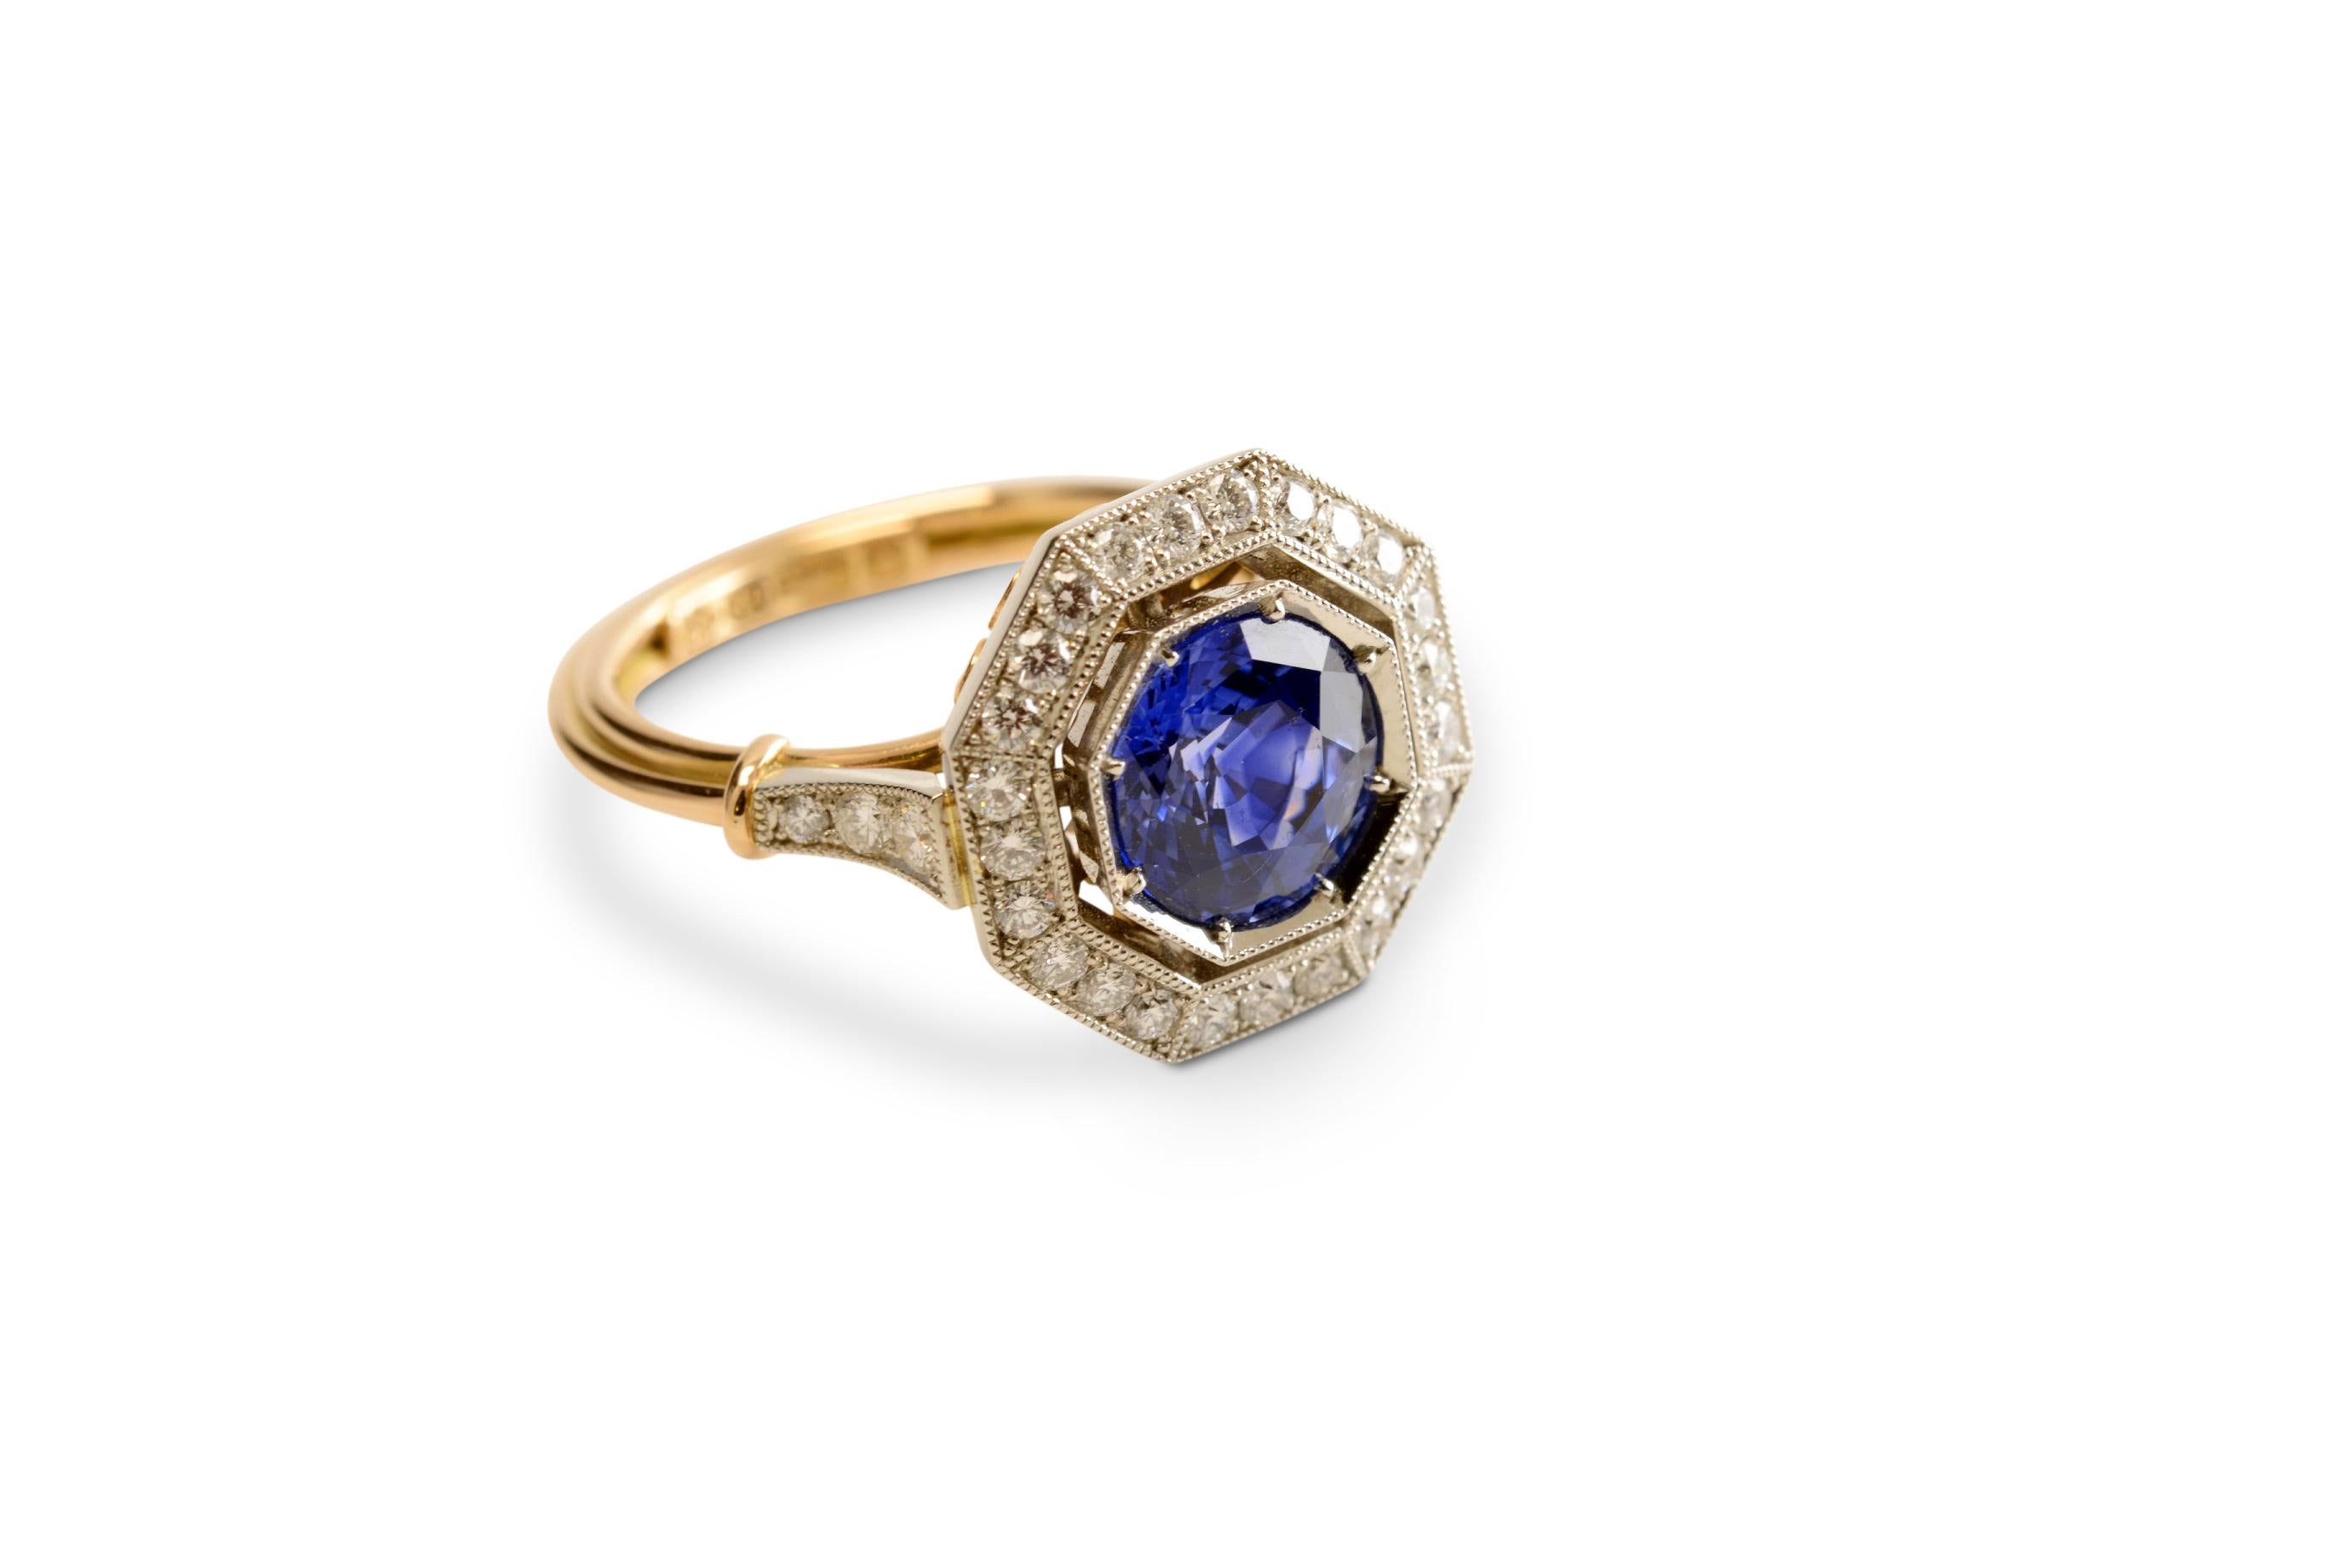 Every intricate detail has been considered to create this Edwardian inspired ring. A 2.80 carat round brilliant cut blue Ceylon sapphire sits in a fine octagonal shaped setting, its surrounded by a diamond set halo and supported by sweeping diamond